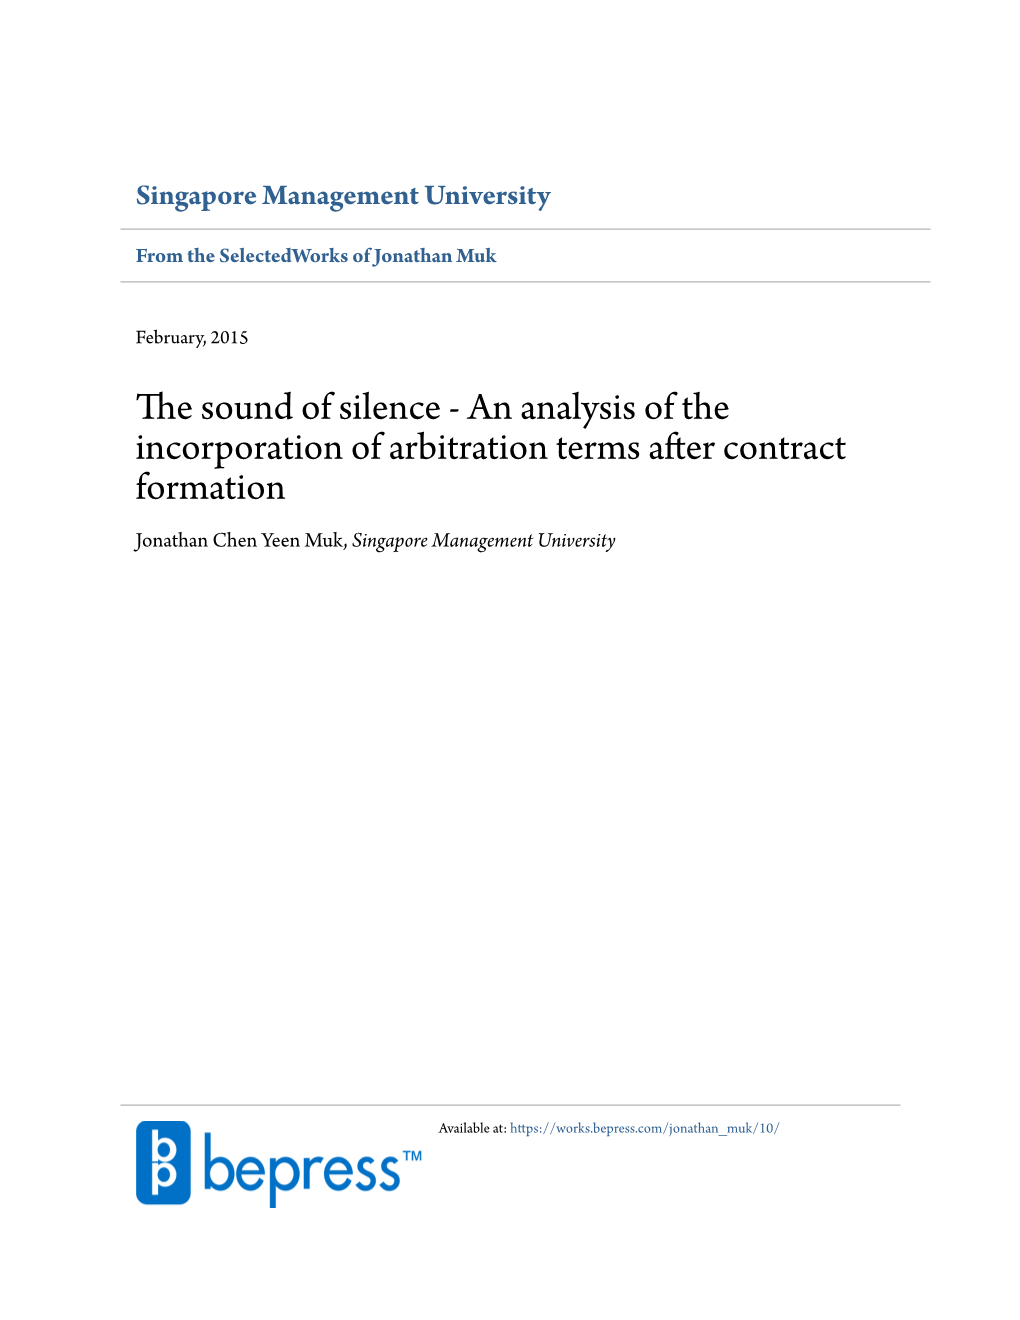 The Sound of Silence – an Analysis of the Incorporation of Arbitration Terms After Contract Formation (R1 International Pte Ltd V Lonstroff AG [2015] 1 SLR 521)